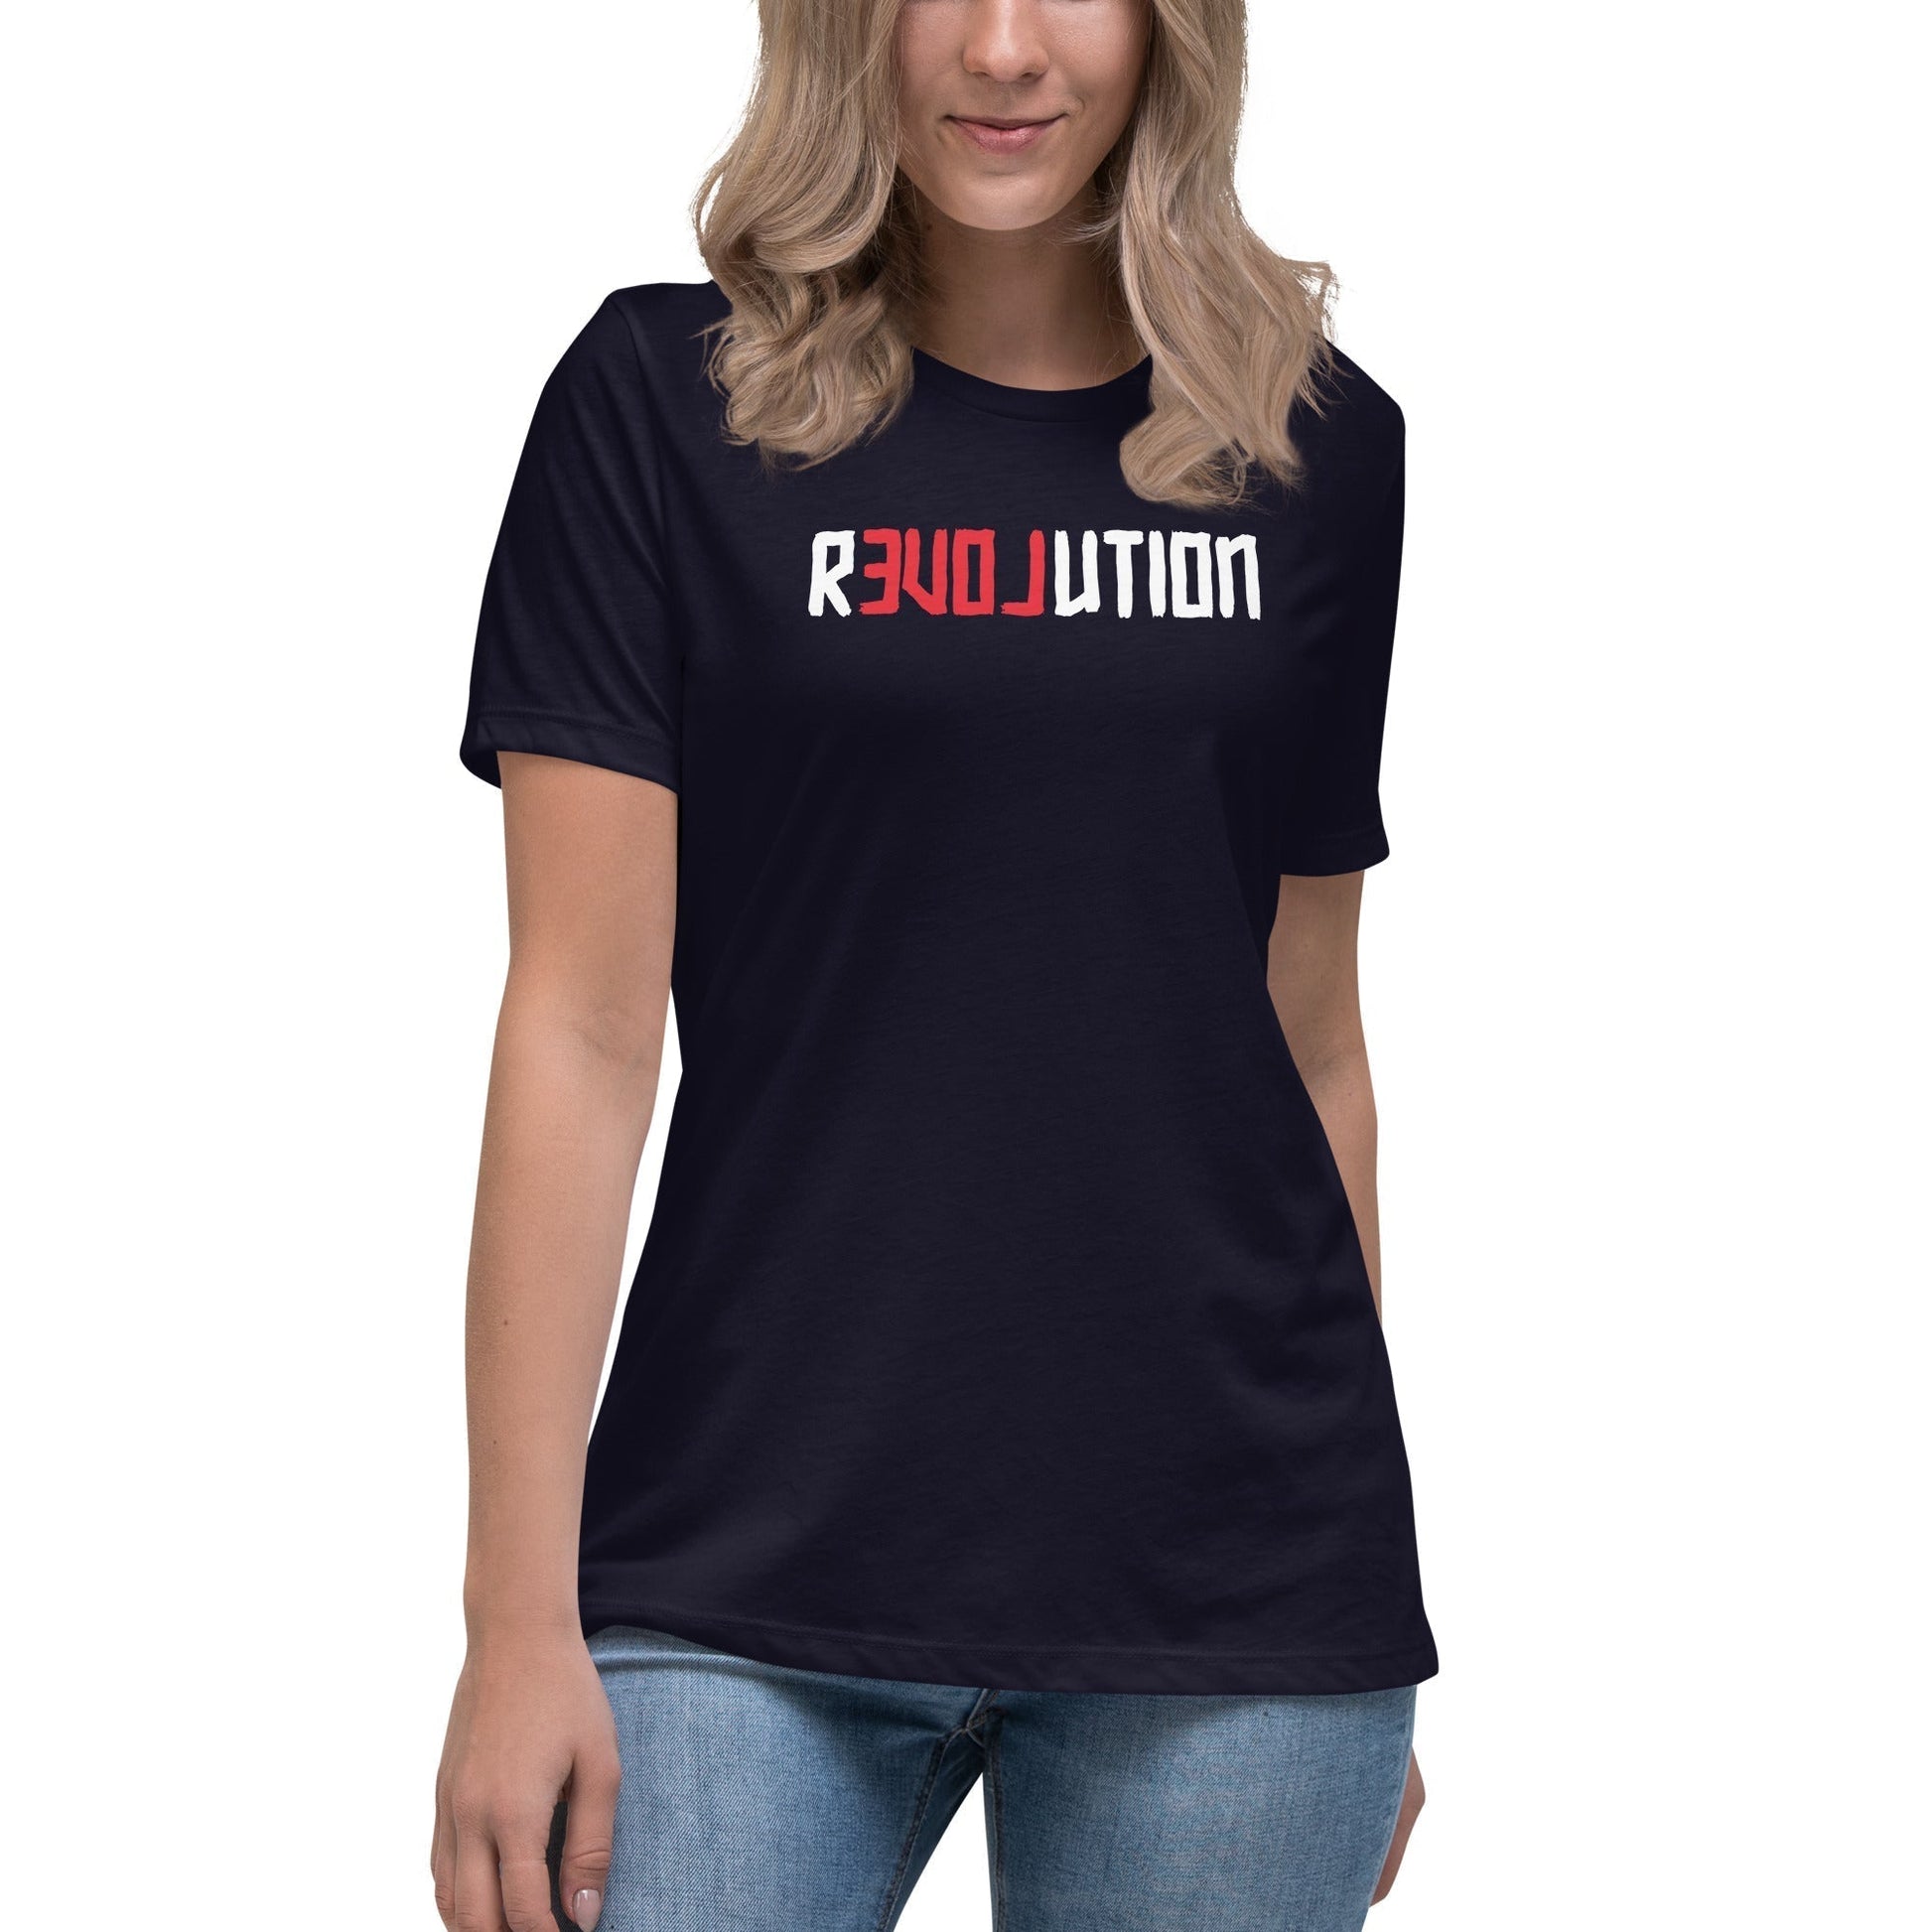 There is Love in Revolution - Women's T-Shirt